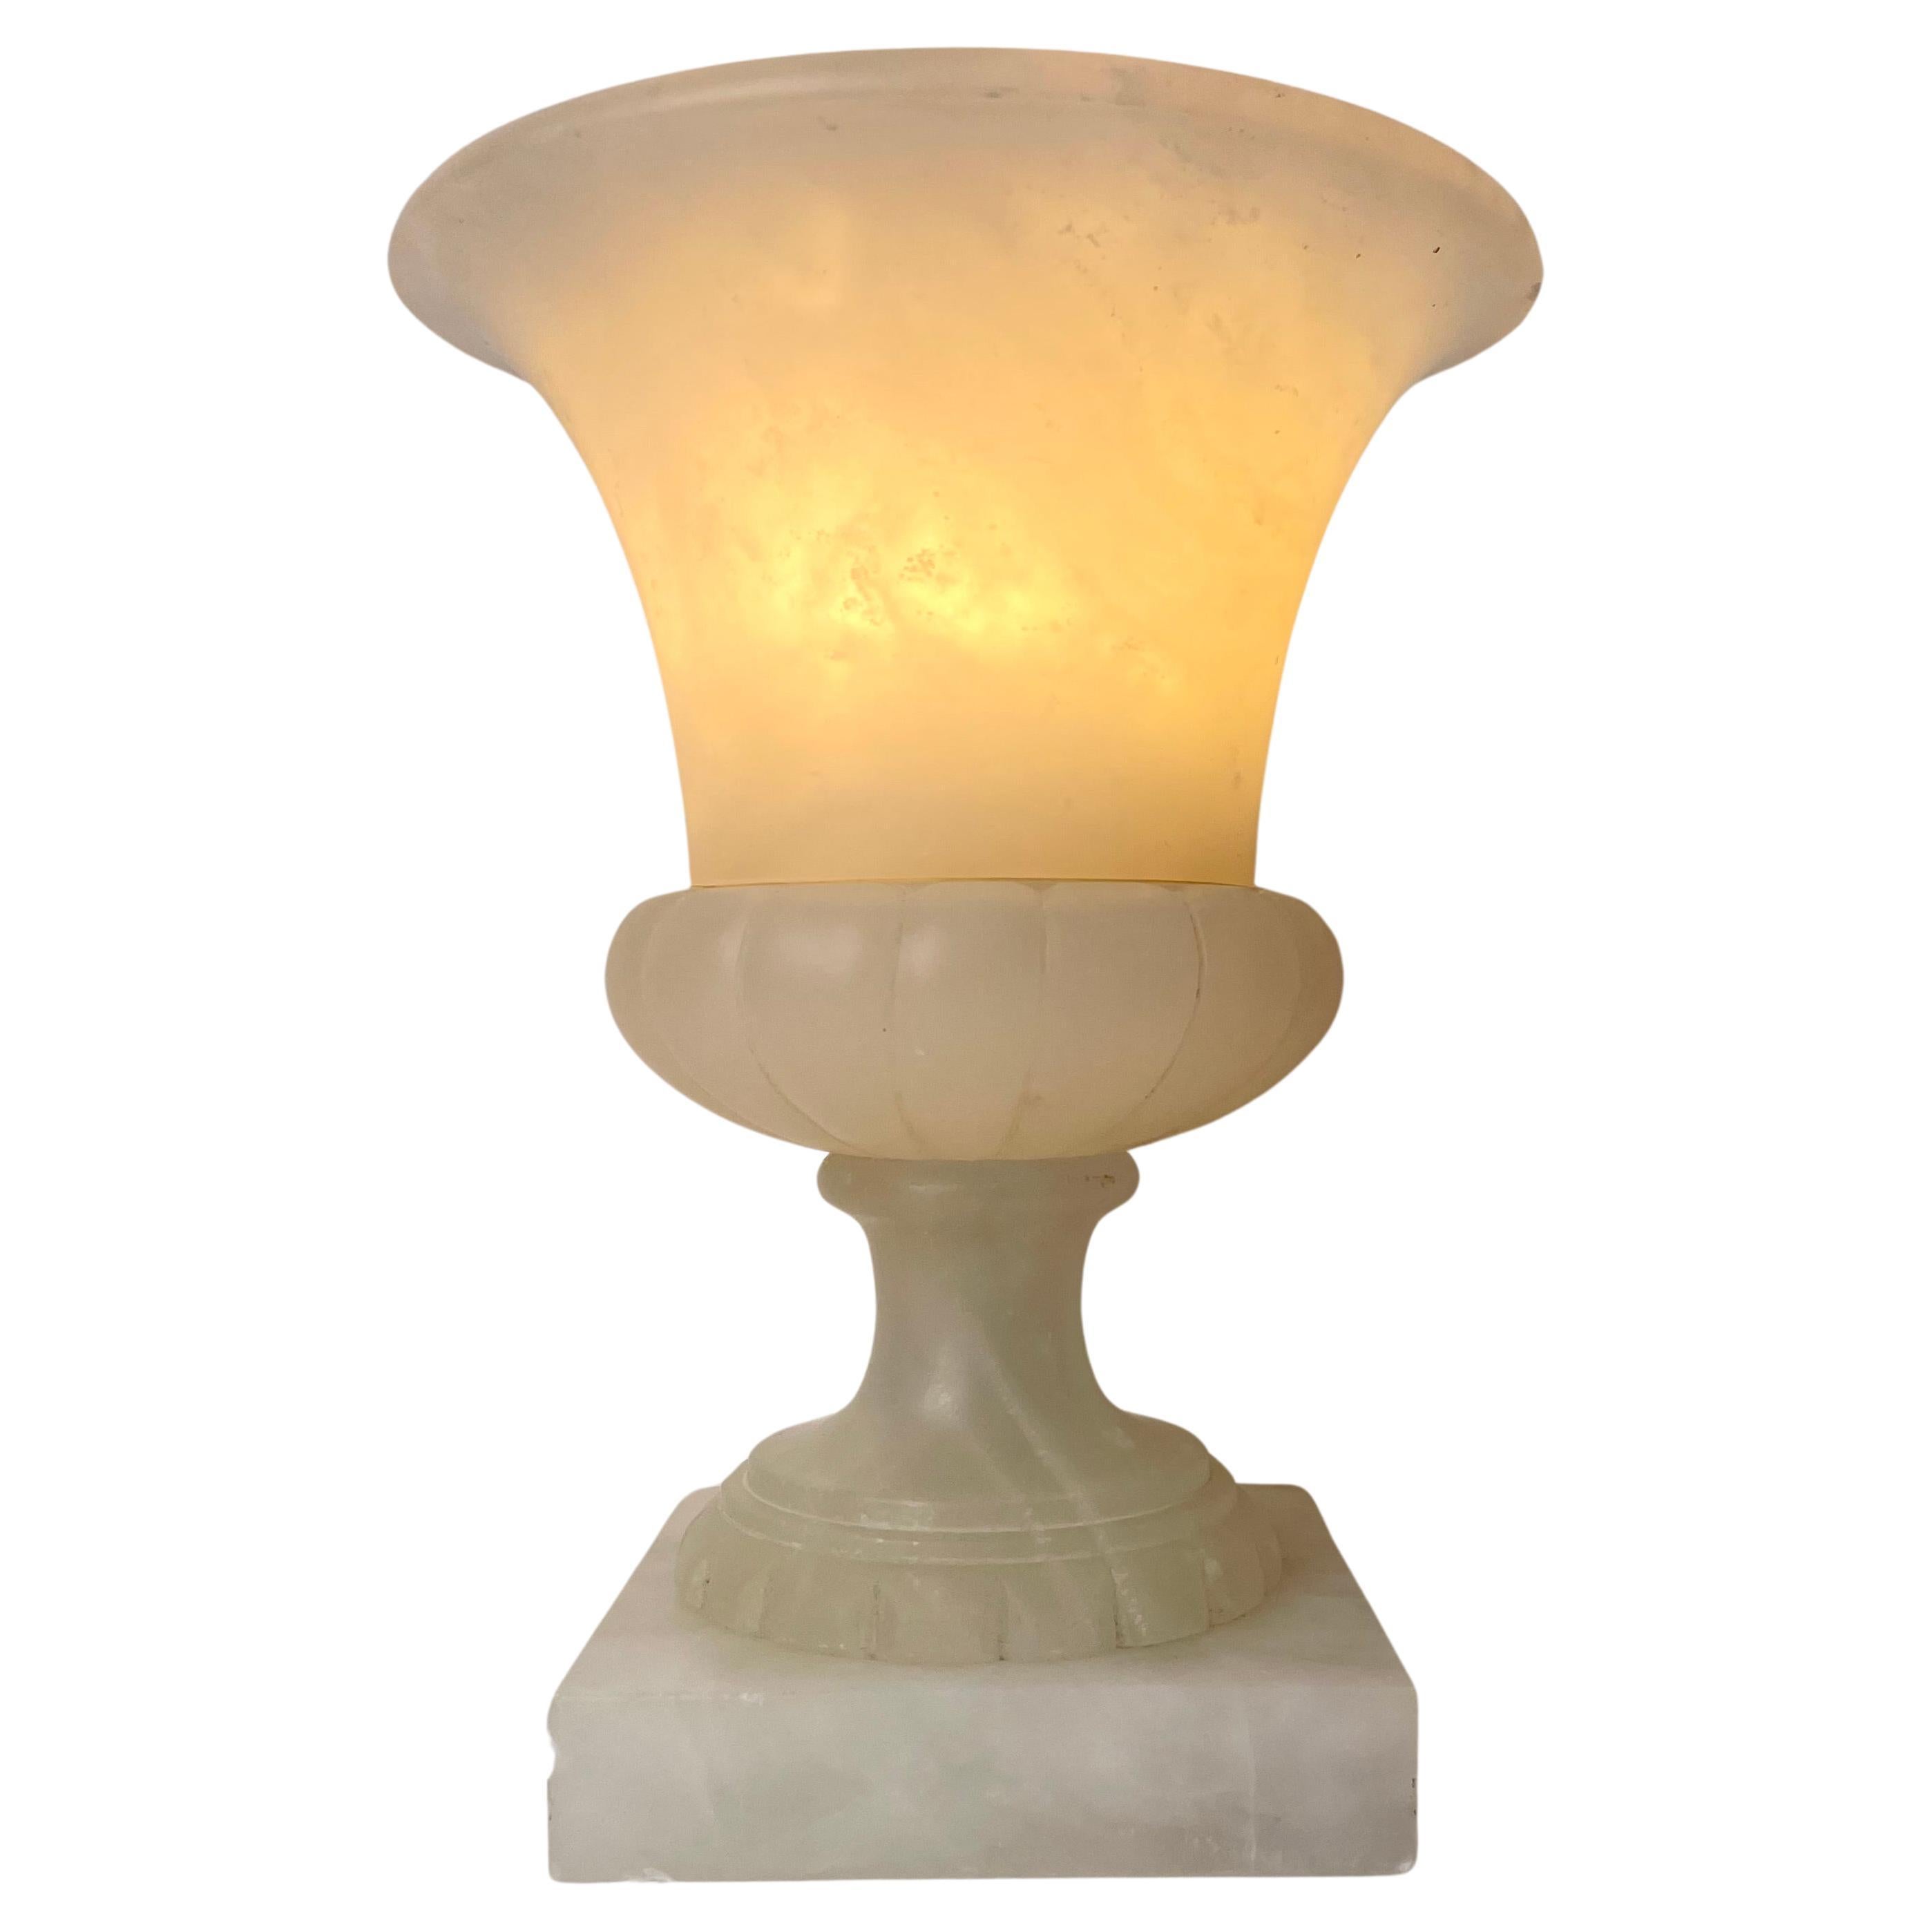 Urn-shaped Table Lamp in Alabaster probably from the early 20th Century